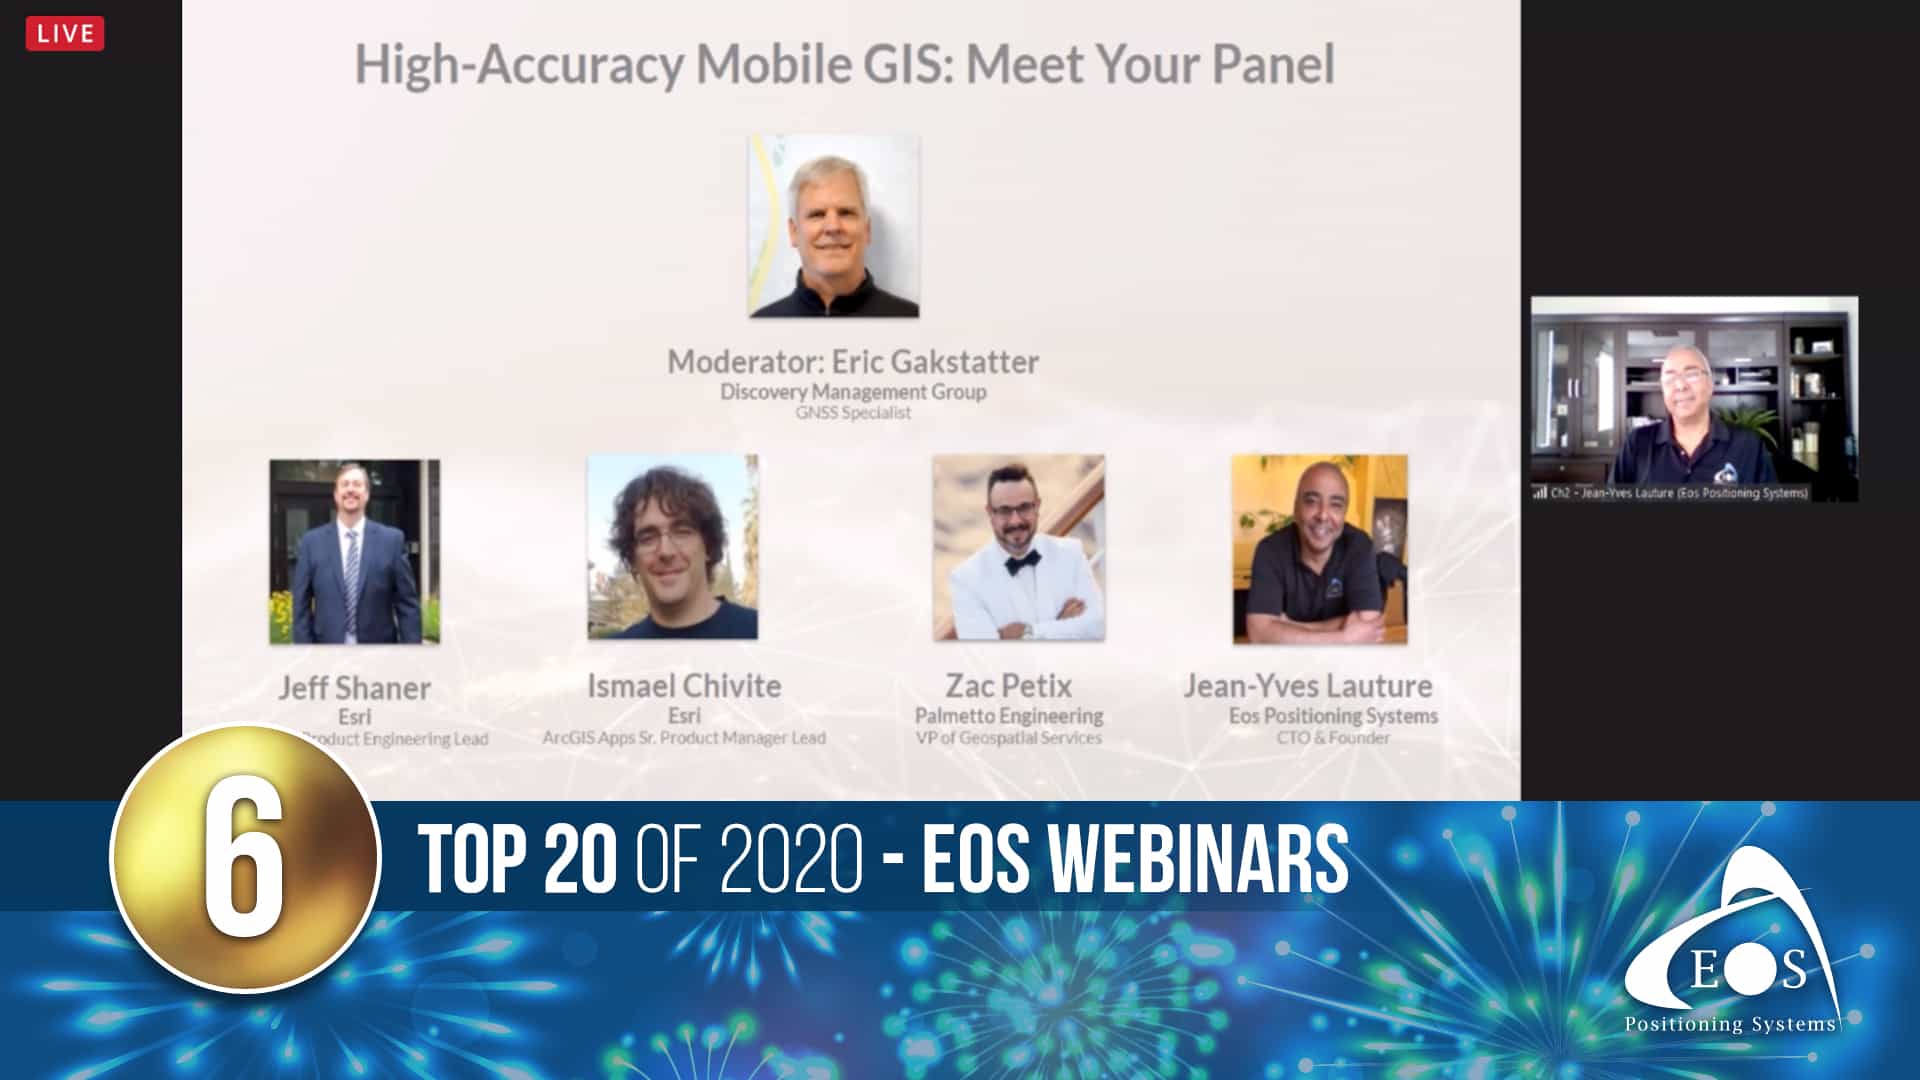 Eos Positioning Systems blog top articles of 2020: 6 - Eos Webinars